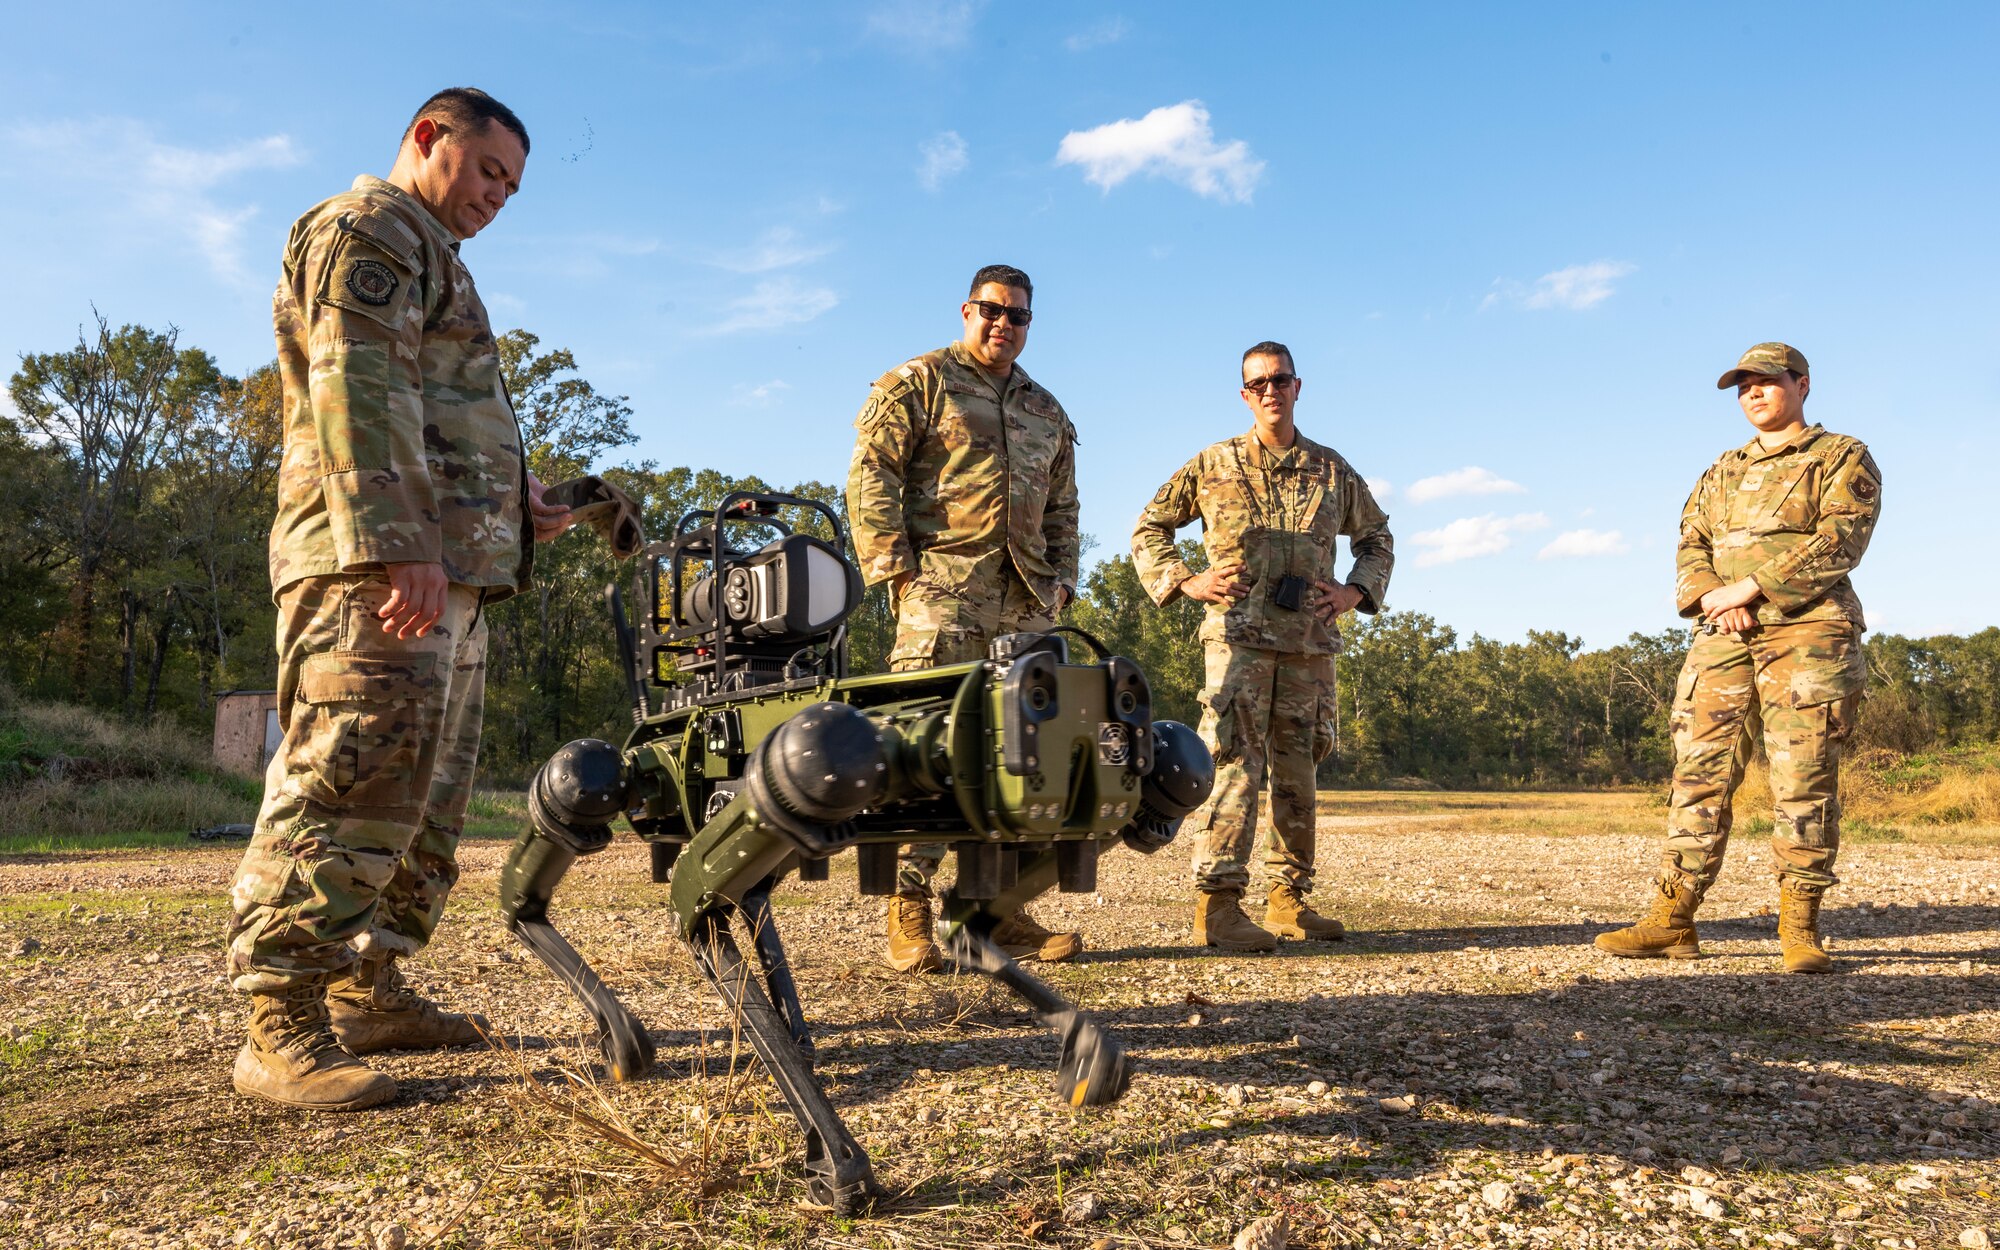 These machines, nicknamed "Robot Dogs", were created to augment manned chemical, biological, radiological, and nuclear response teams, minimizing the danger these Airmen face in hostile environments.